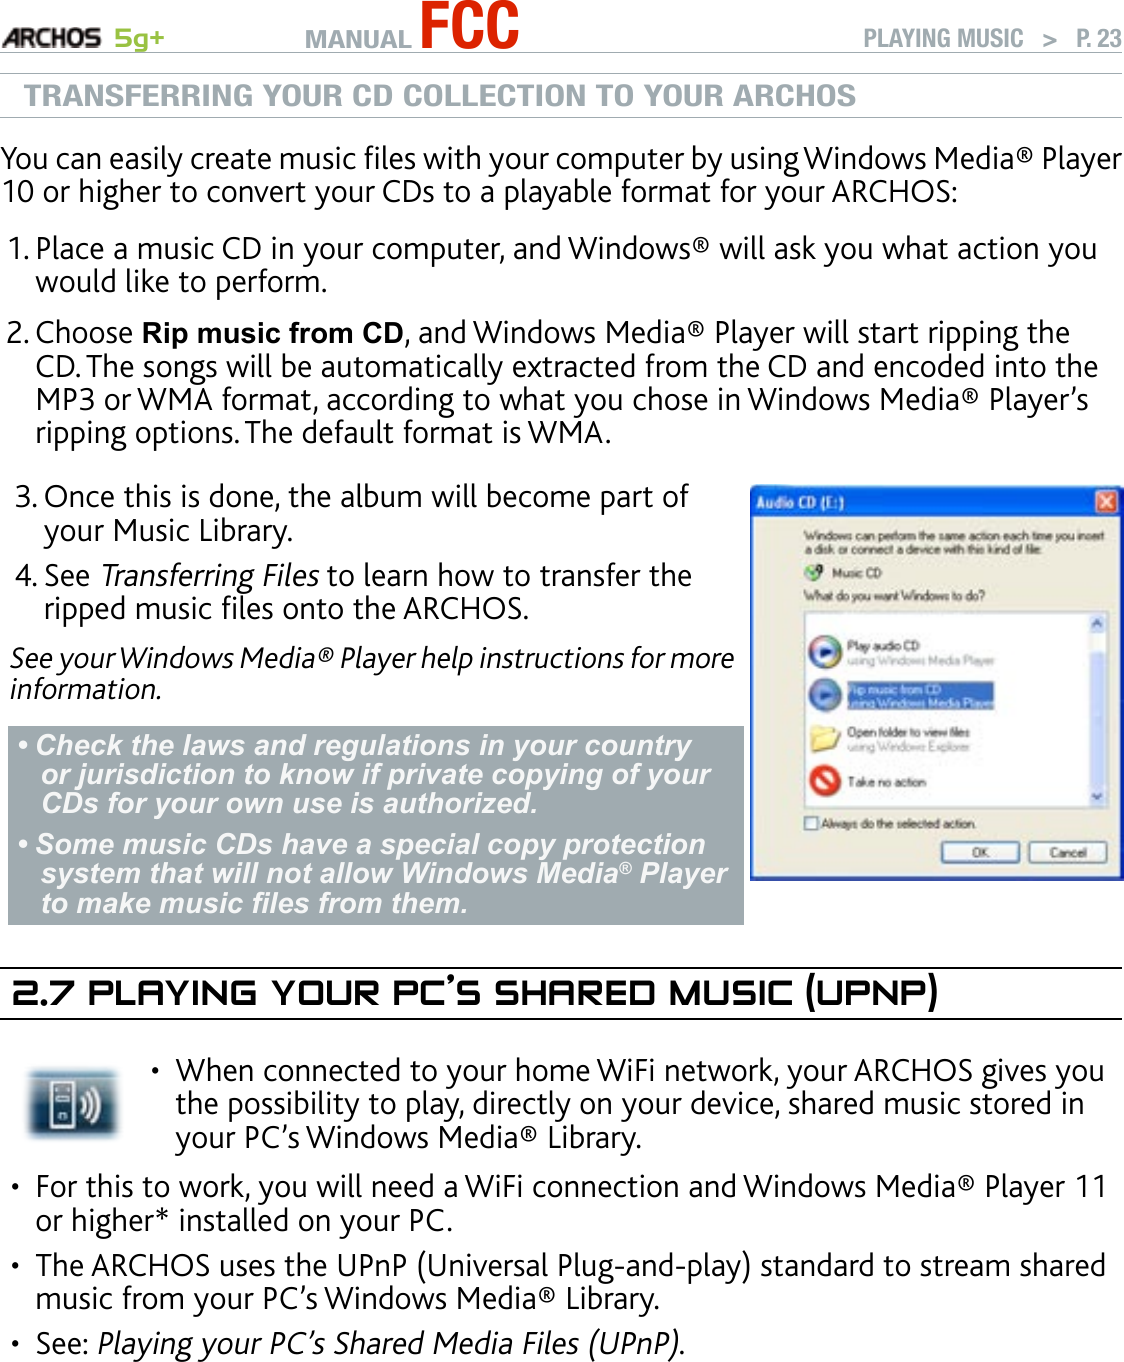 MANUAL FCC 5g+ PLAYING MUSIC   &gt;   P. 23TRANSFERRING YOUR CD COLLECTION TO YOUR ARCHOSYou can easily create music les with your computer by using Windows Media® Player 10 or higher to convert your CDs to a playable format for your ARCHOS: Place a music CD in your computer, and Windows® will ask you what action you would like to perform. Choose Rip music from CD, and Windows Media® Player will start ripping the CD. The songs will be automatically extracted from the CD and encoded into the MP3 or WMA format, according to what you chose in Windows Media® Player’s ripping options. The default format is WMA.Once this is done, the album will become part of your Music Library. See Transferring Files to learn how to transfer the ripped music les onto the ARCHOS.See your Windows Media® Player help instructions for more information.Check the laws and regulations in your country or jurisdiction to know if private copying of your CDs for your own use is authorized. Some music CDs have a special copy protection system that will not allow Windows Media® Player to make music les from them.••3.4.2.7 PlayIng yOur PC’s shared MusIC (uPnP)When connected to your home WiFi network, your ARCHOS gives you the possibility to play, directly on your device, shared music stored in your PC’s Windows Media® Library. •For this to work, you will need a WiFi connection and Windows Media® Player 11 or higher* installed on your PC. The ARCHOS uses the UPnP (Universal Plug-and-play) standard to stream shared music from your PC’s Windows Media® Library.See: Playing your PC’s Shared Media Files (UPnP). * There are other products on the market that also can share media les using the UPnP standard.1.2.•••